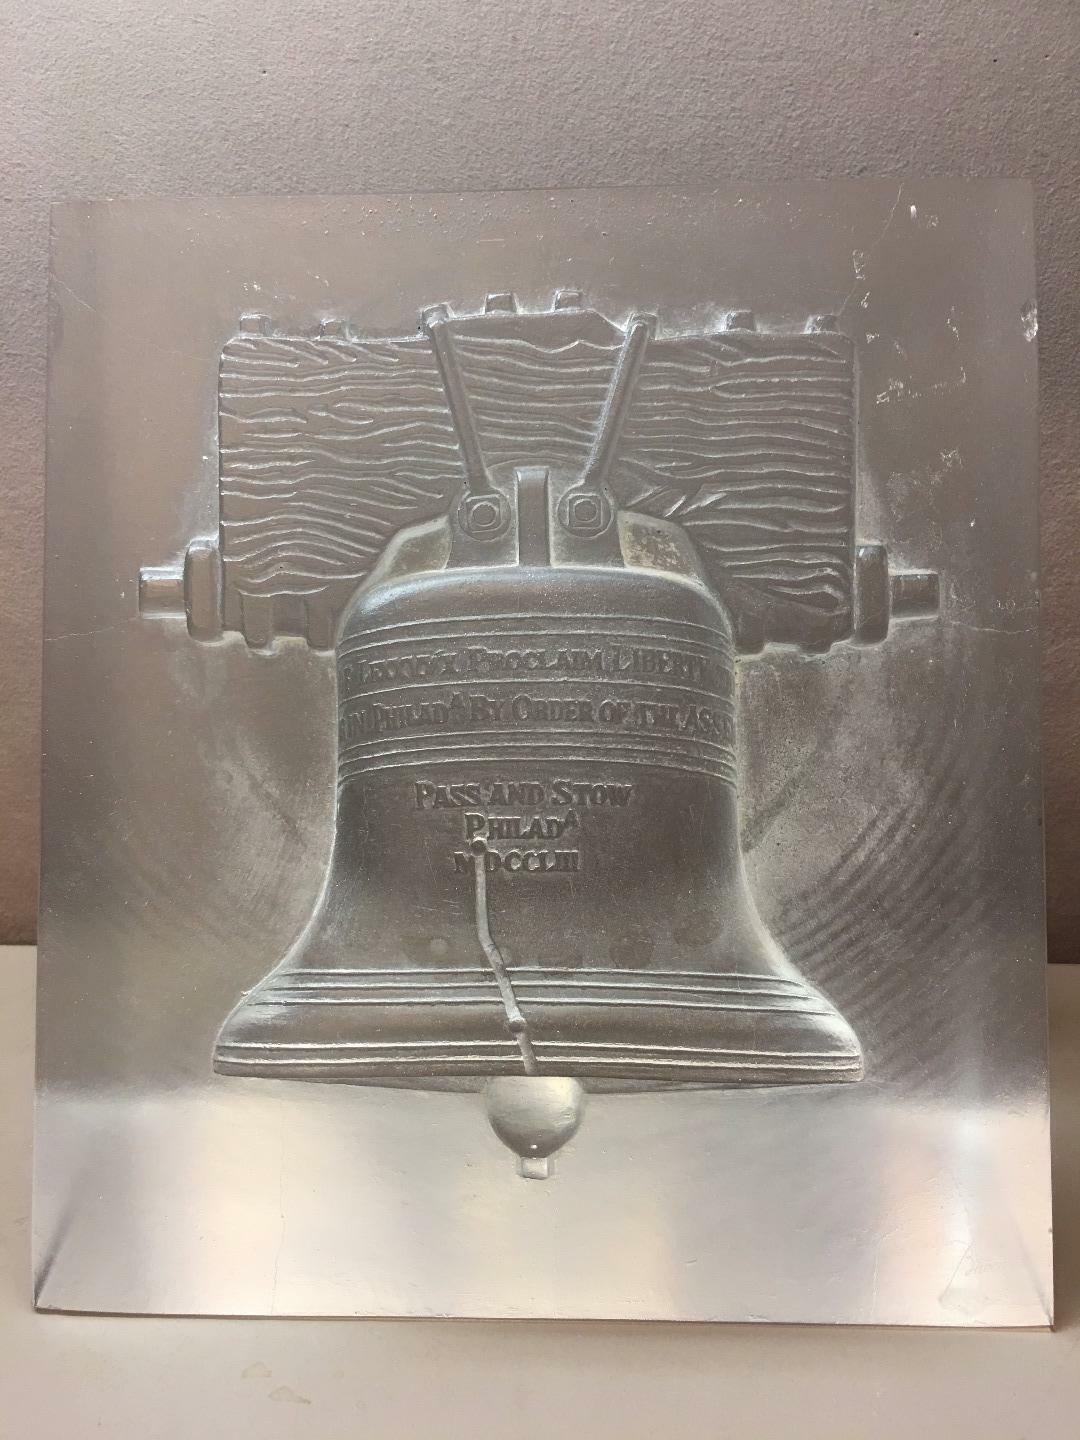 Primary image for Rare Baccarat Crystal Bicentennial Liberty Bell Sculpture, Ltd Edition 24 of 50